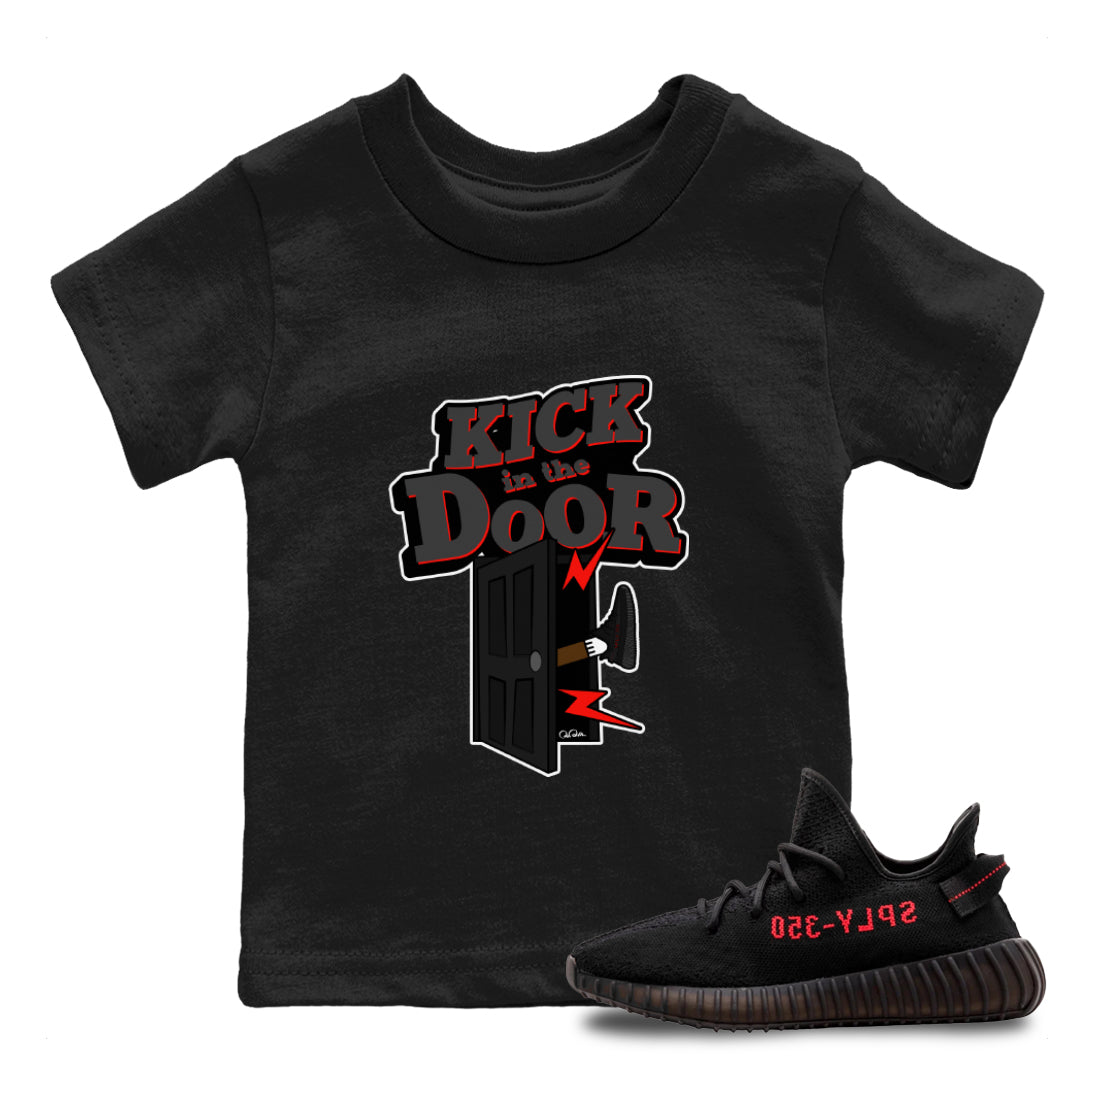 Yeezy 350 Bred shirt to match jordans Kick In The Door sneaker tees Adidas Yeezy Boost V2 350 Bred SNRT Sneaker Release Tees Baby Toddler Black 1 T-Shirt